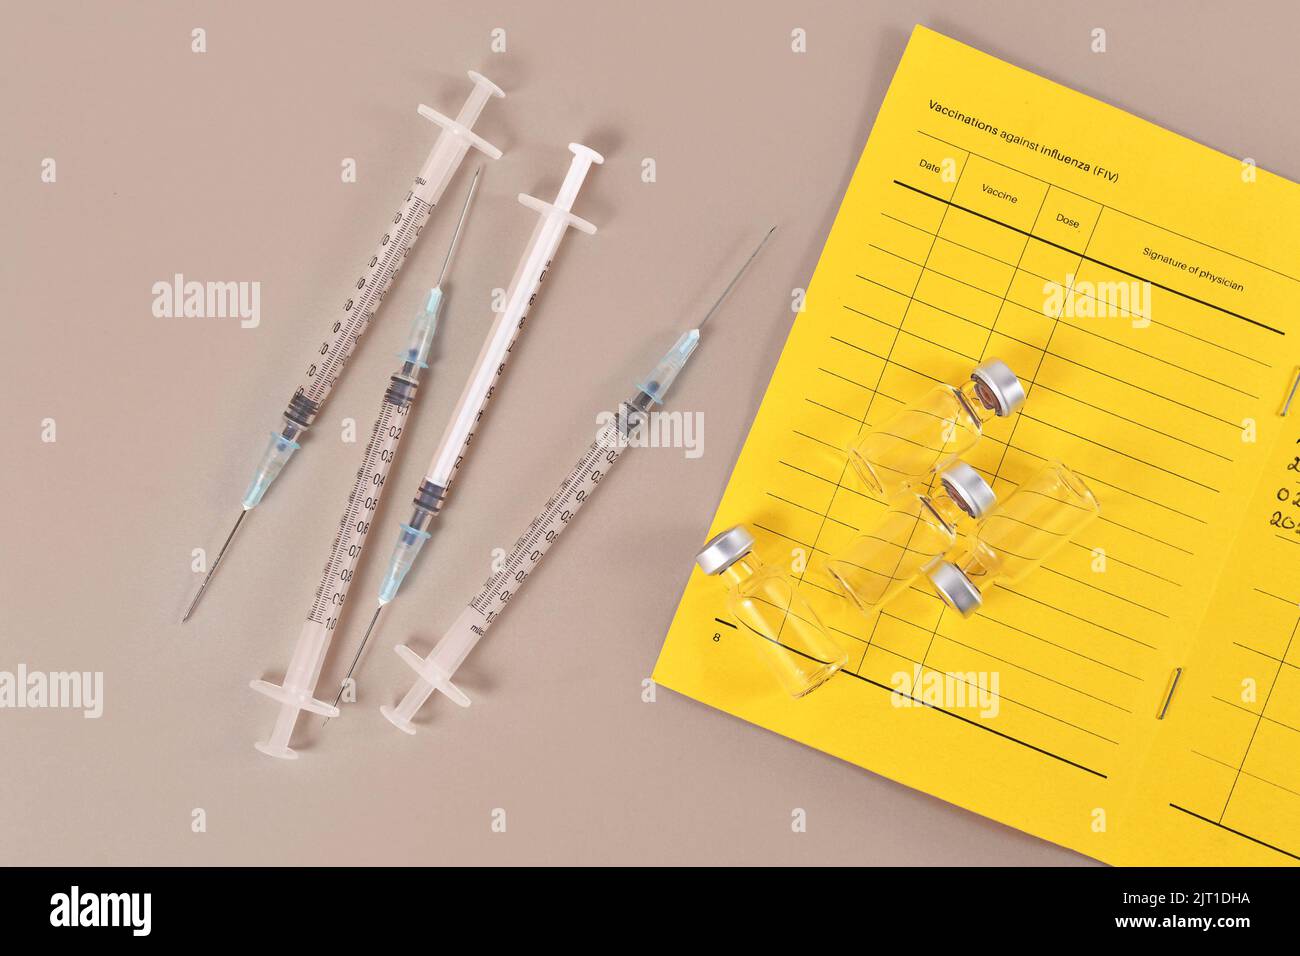 Concept for Corona virus booster vaccination showing vaccine passport with 4 syringes and vials Stock Photo